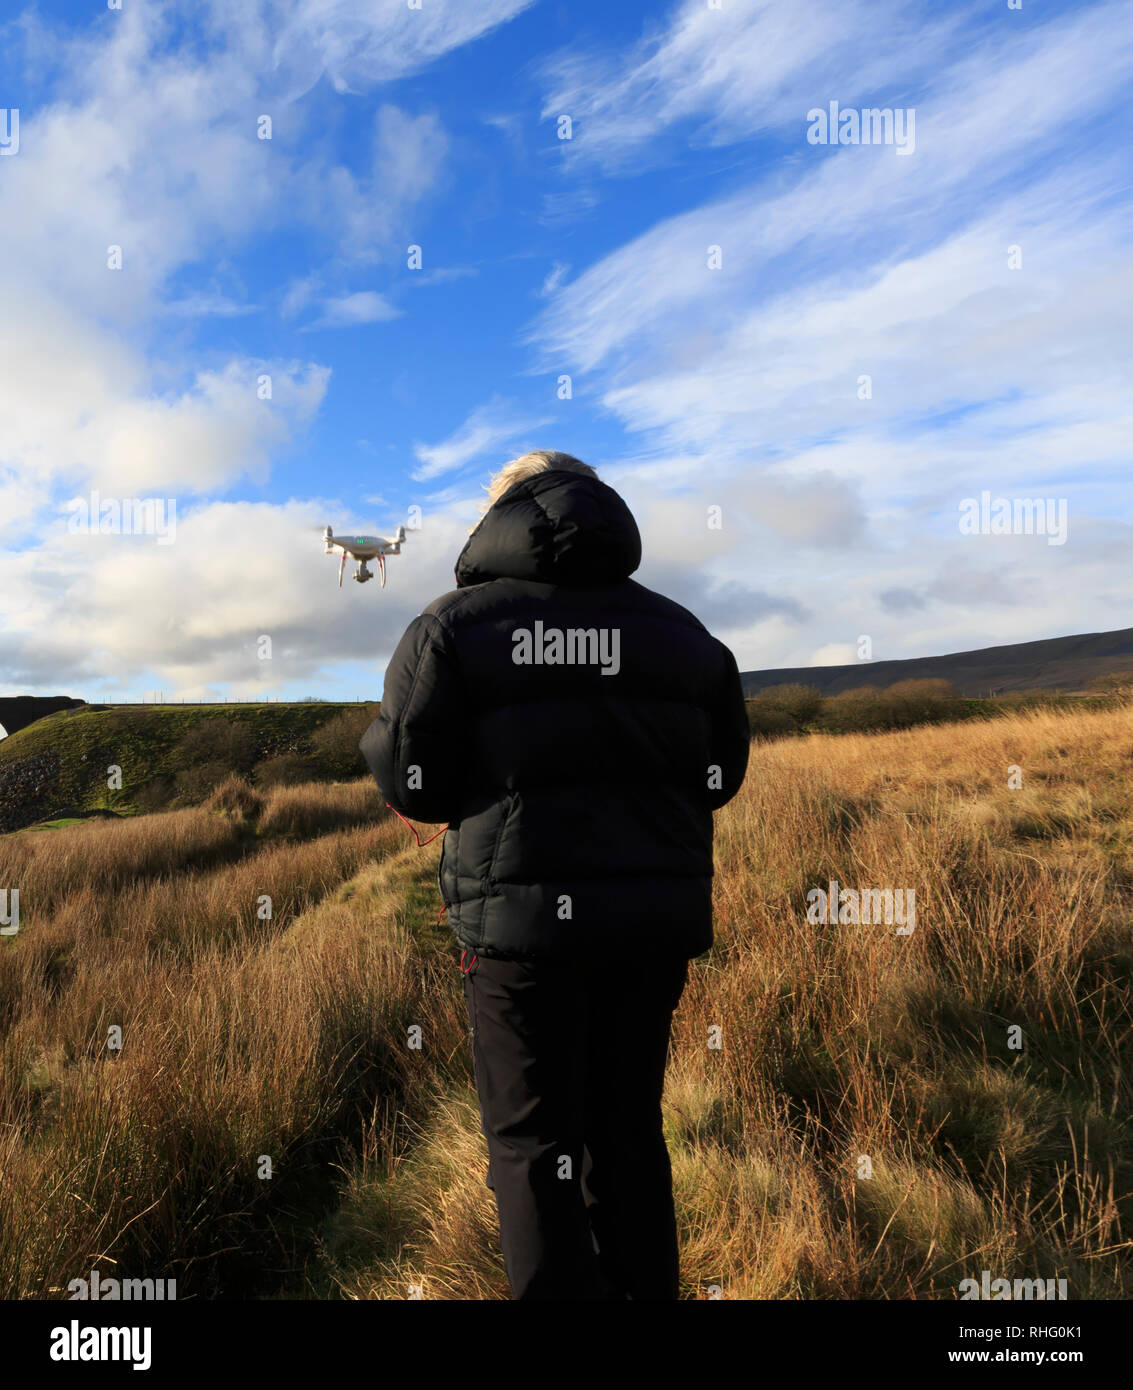 Drone being operated above moorland Stock Photo